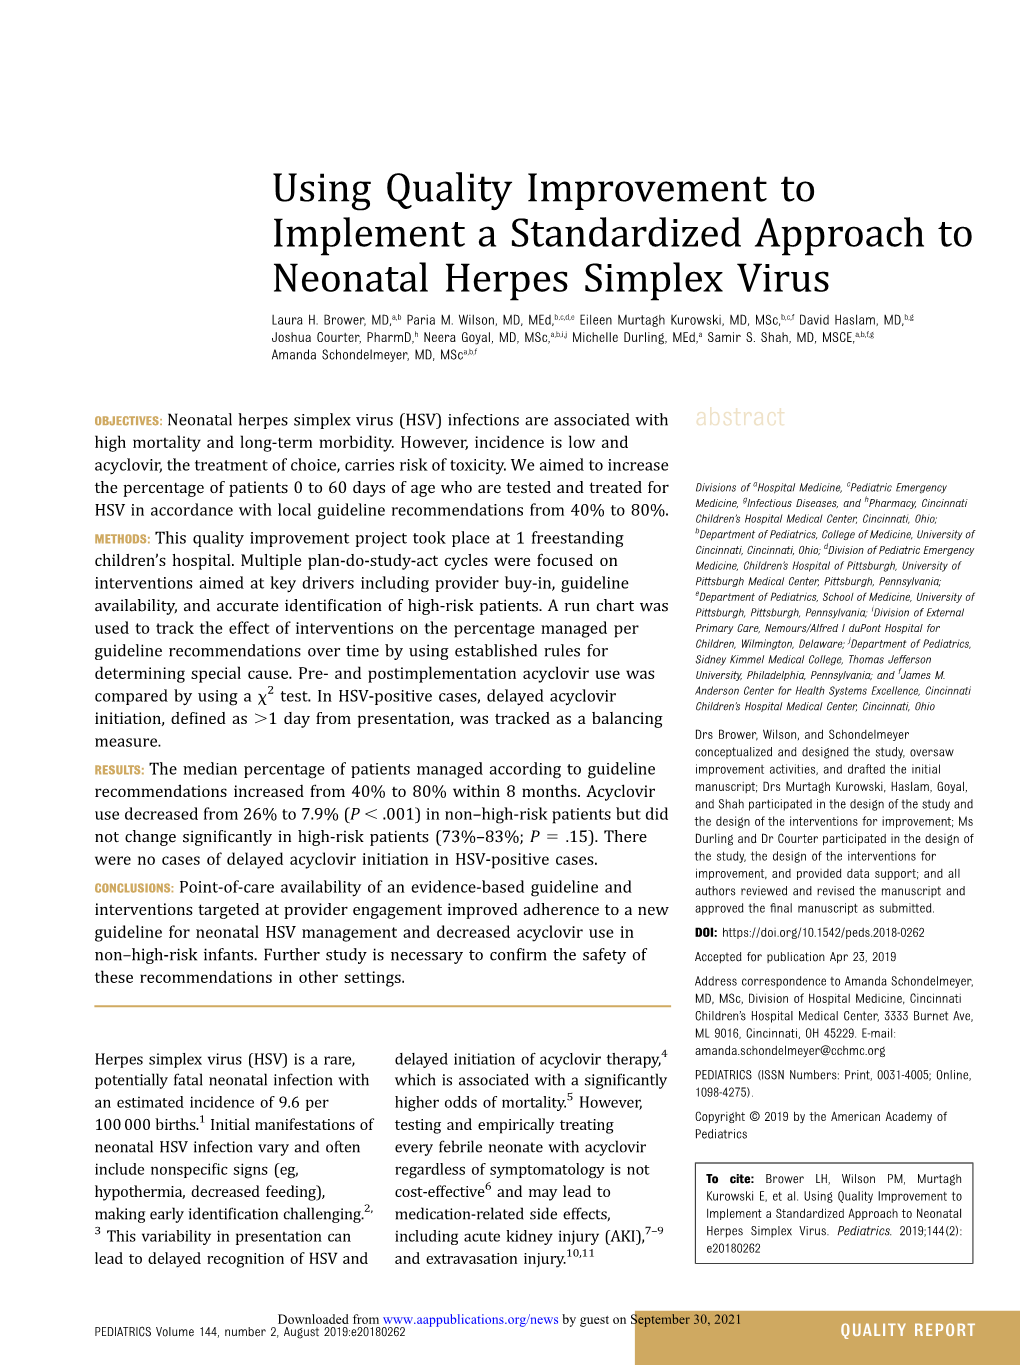 Using Quality Improvement to Implement a Standardized Approach to Neonatal Herpes Simplex Virus Laura H